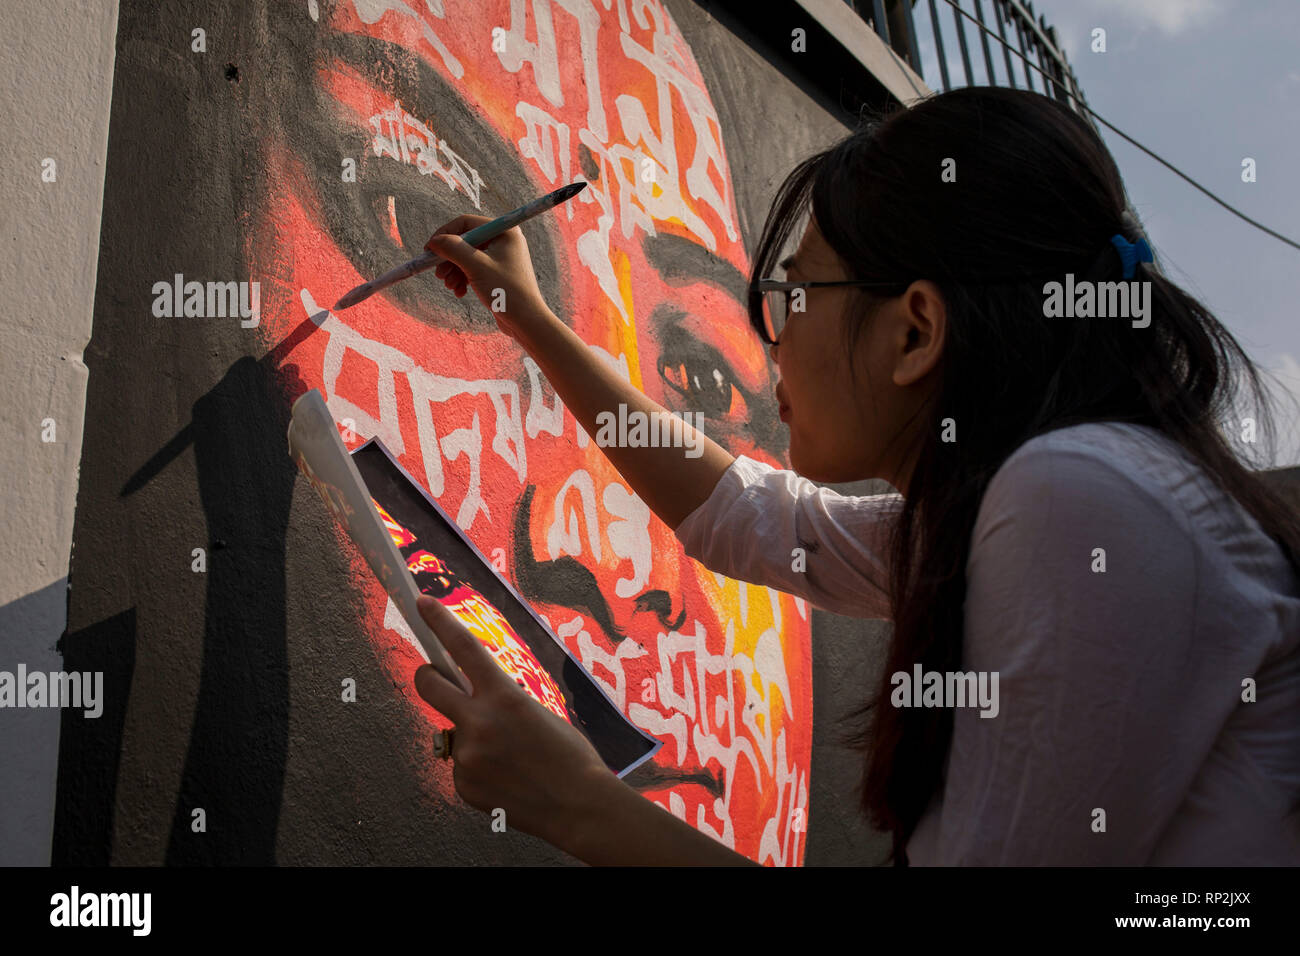 Dhaka, Bangladesh. 20th Feb, 2019.  An artist paints on the wall as part of the decoration for the International Mother Language Day celebration in front of the language matyrs monument  in Dhaka, Bangladesh on February 20, 2019.  The nation will pay tribute to the Bangla language movement martyrs who sacrificed their life for their mother tongue in 1952, while the United Nations Educational Scientific and Cultural Organization (UNESCO) declared 21 February as the International Mother Language Day. Credit: zakir hossain chowdhury zakir/Alamy Live News Stock Photo